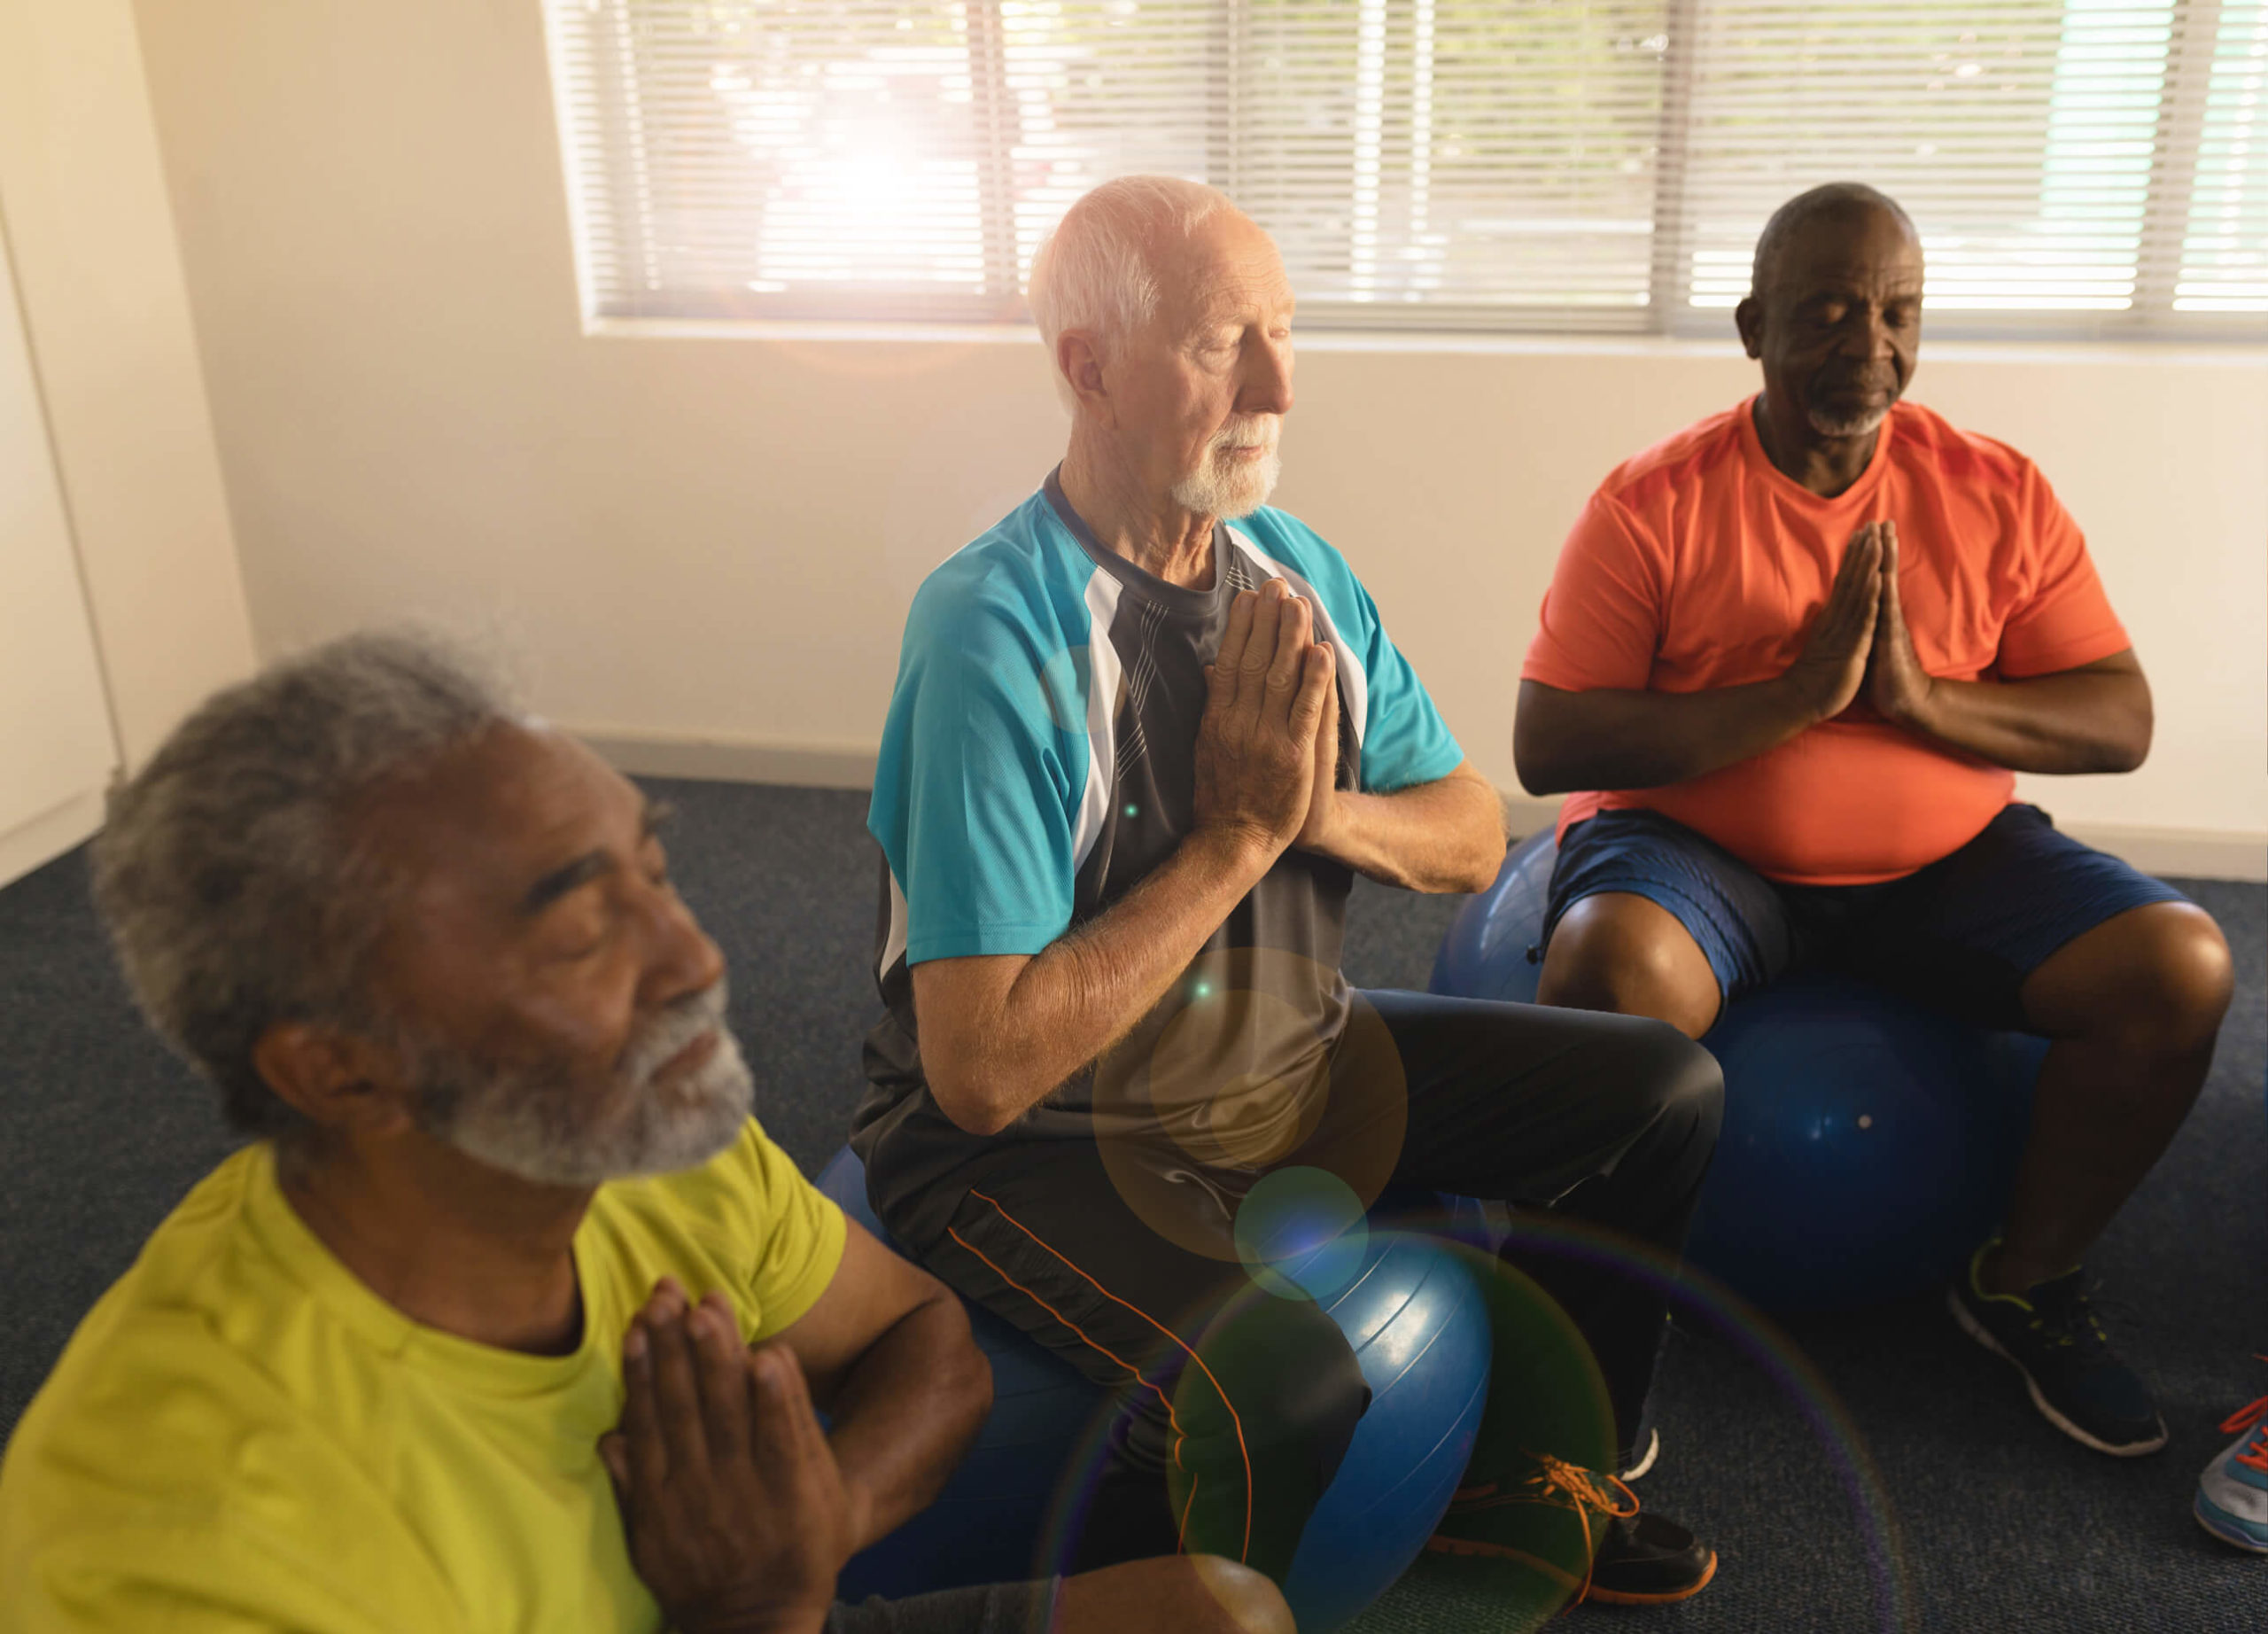 Three residents sitting on exercise balls in a peaceful meditative pose with closed eyes.